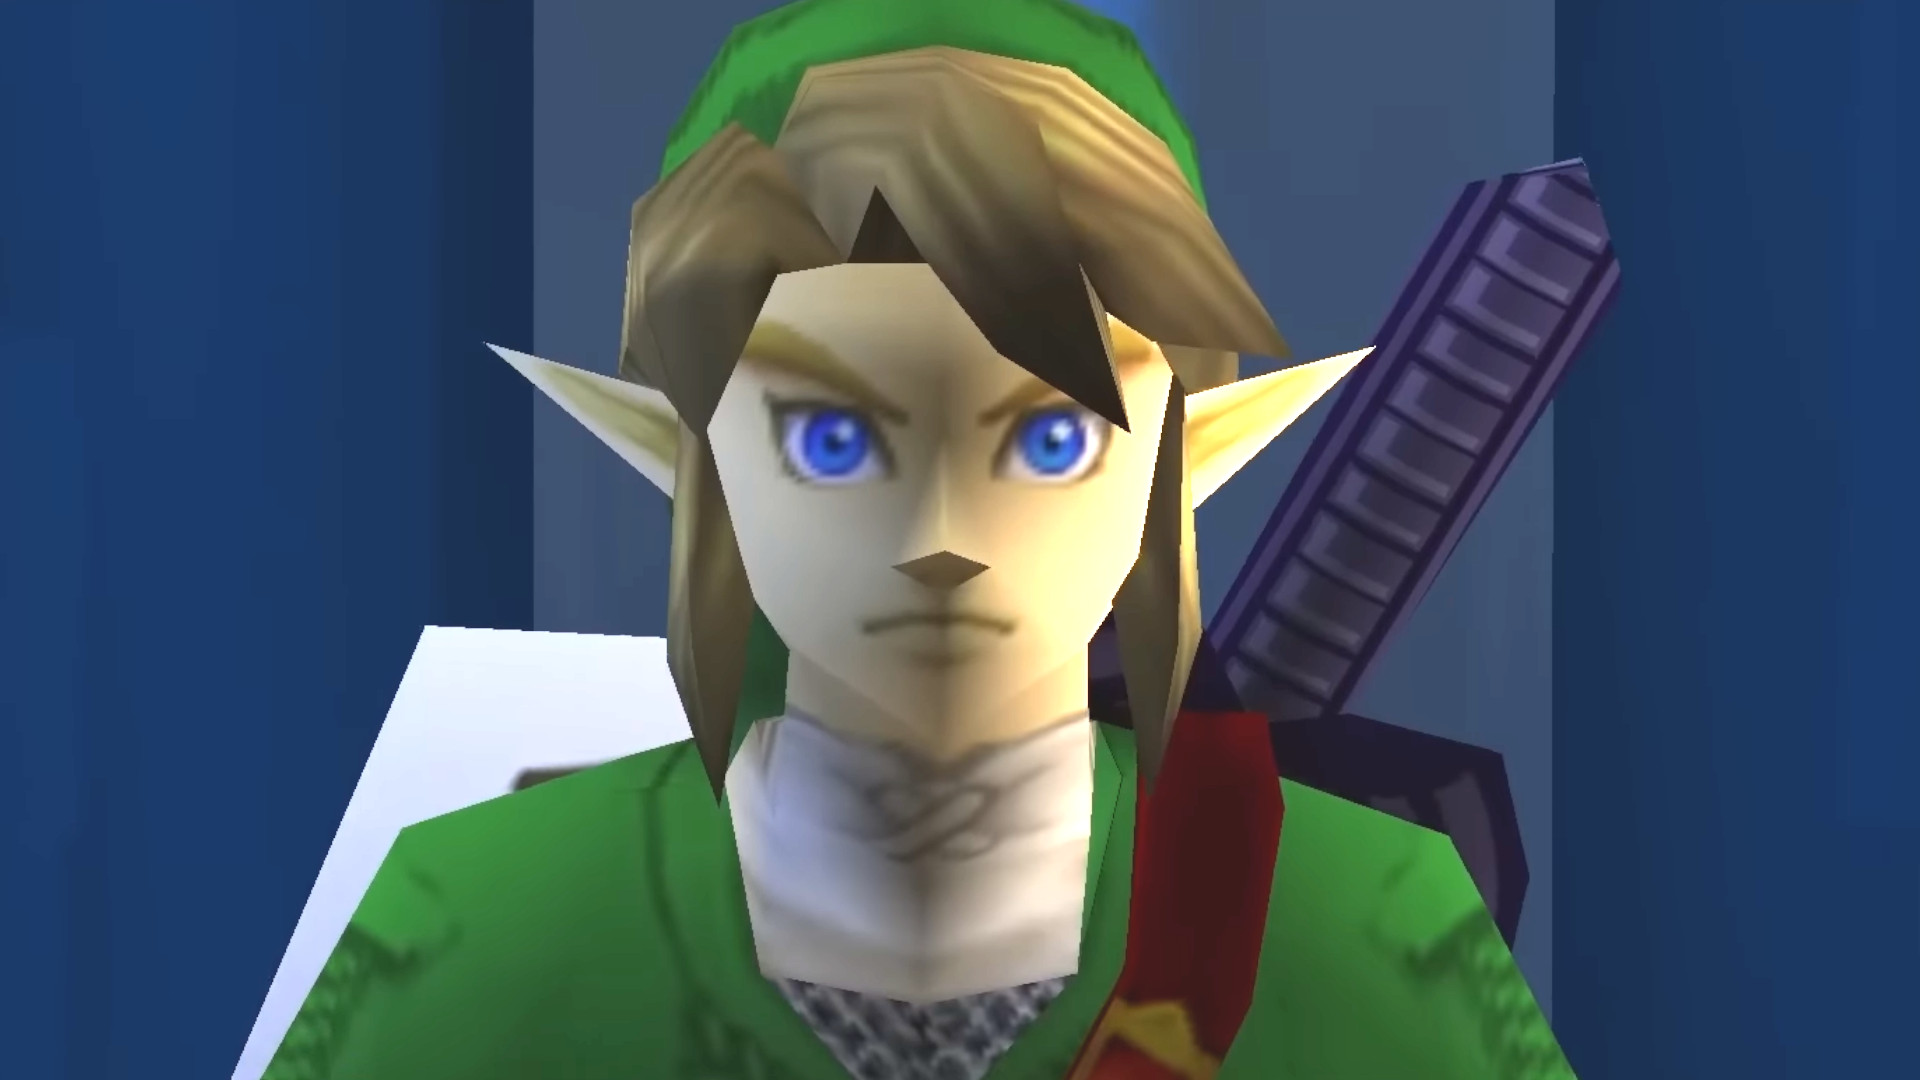 PC port of Ocarina of Time prepares for February release